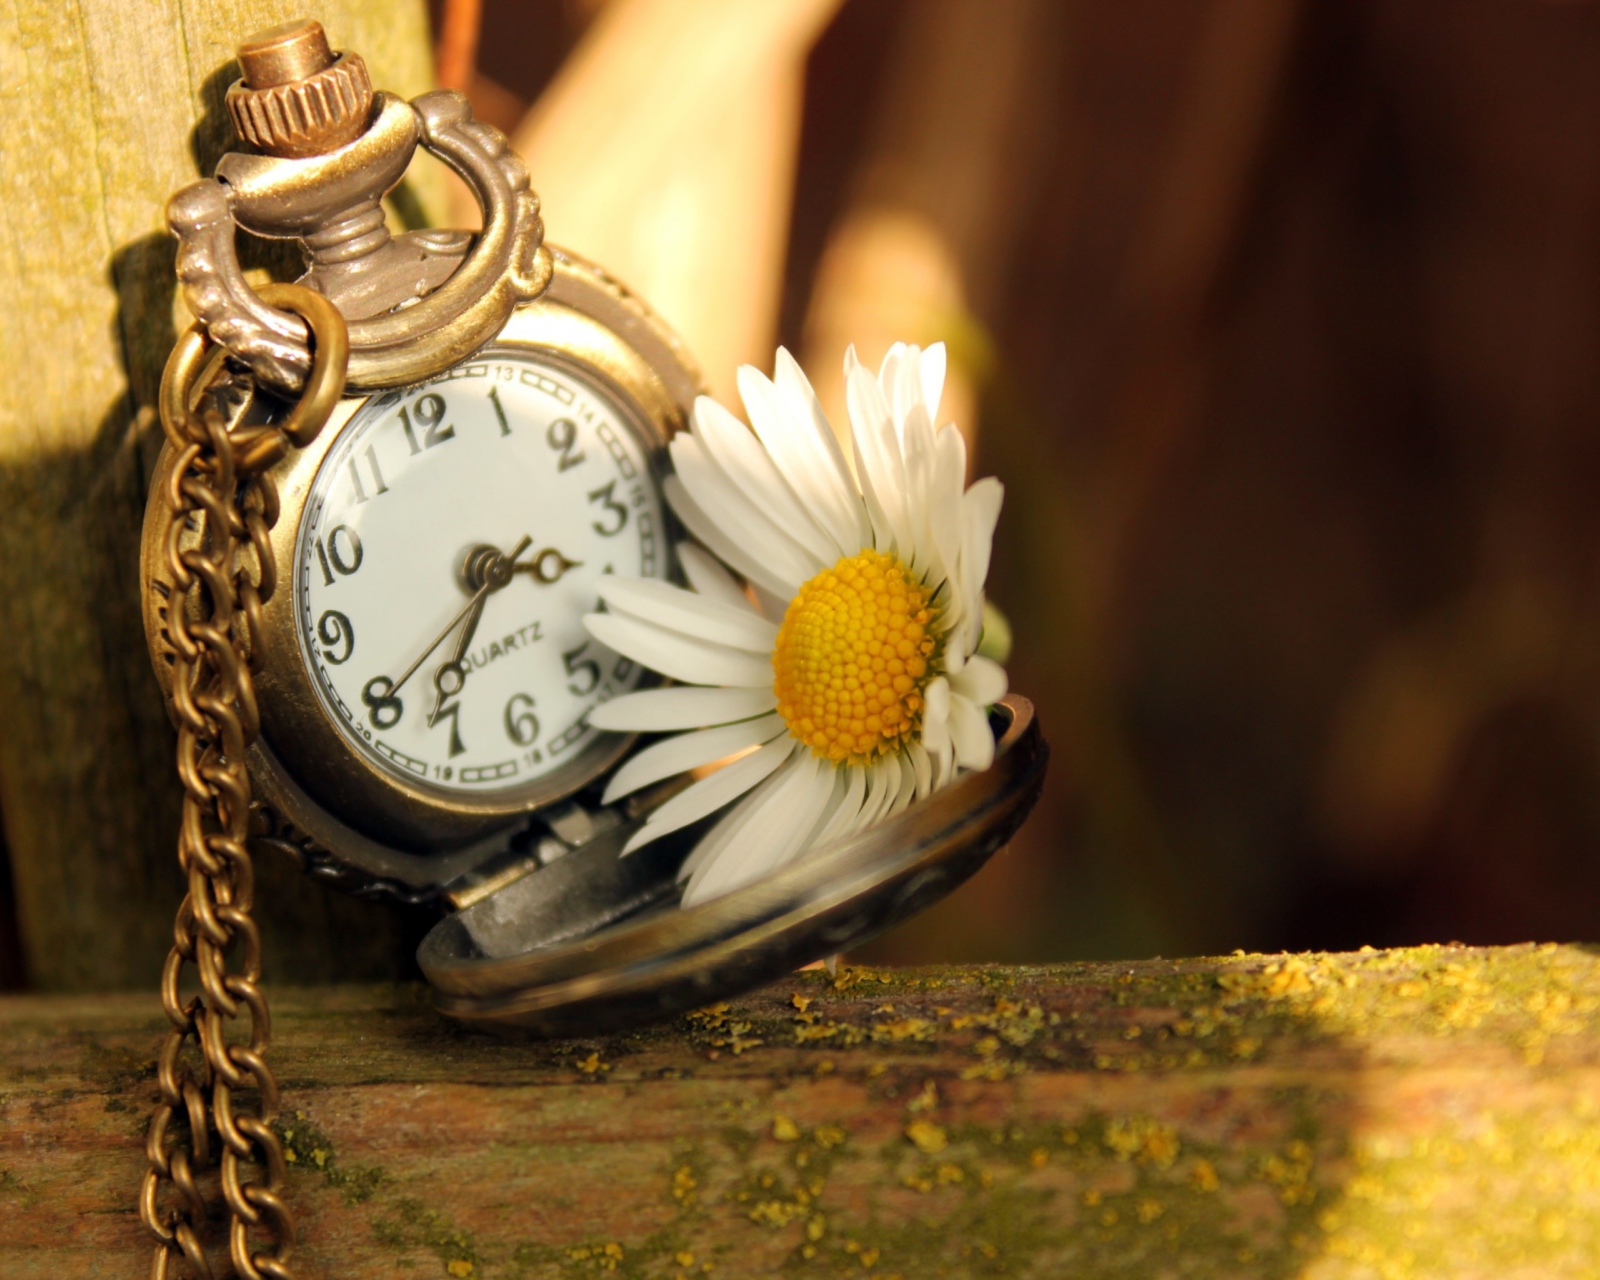 Das Vintage Watch And Daisy Wallpaper 1600x1280